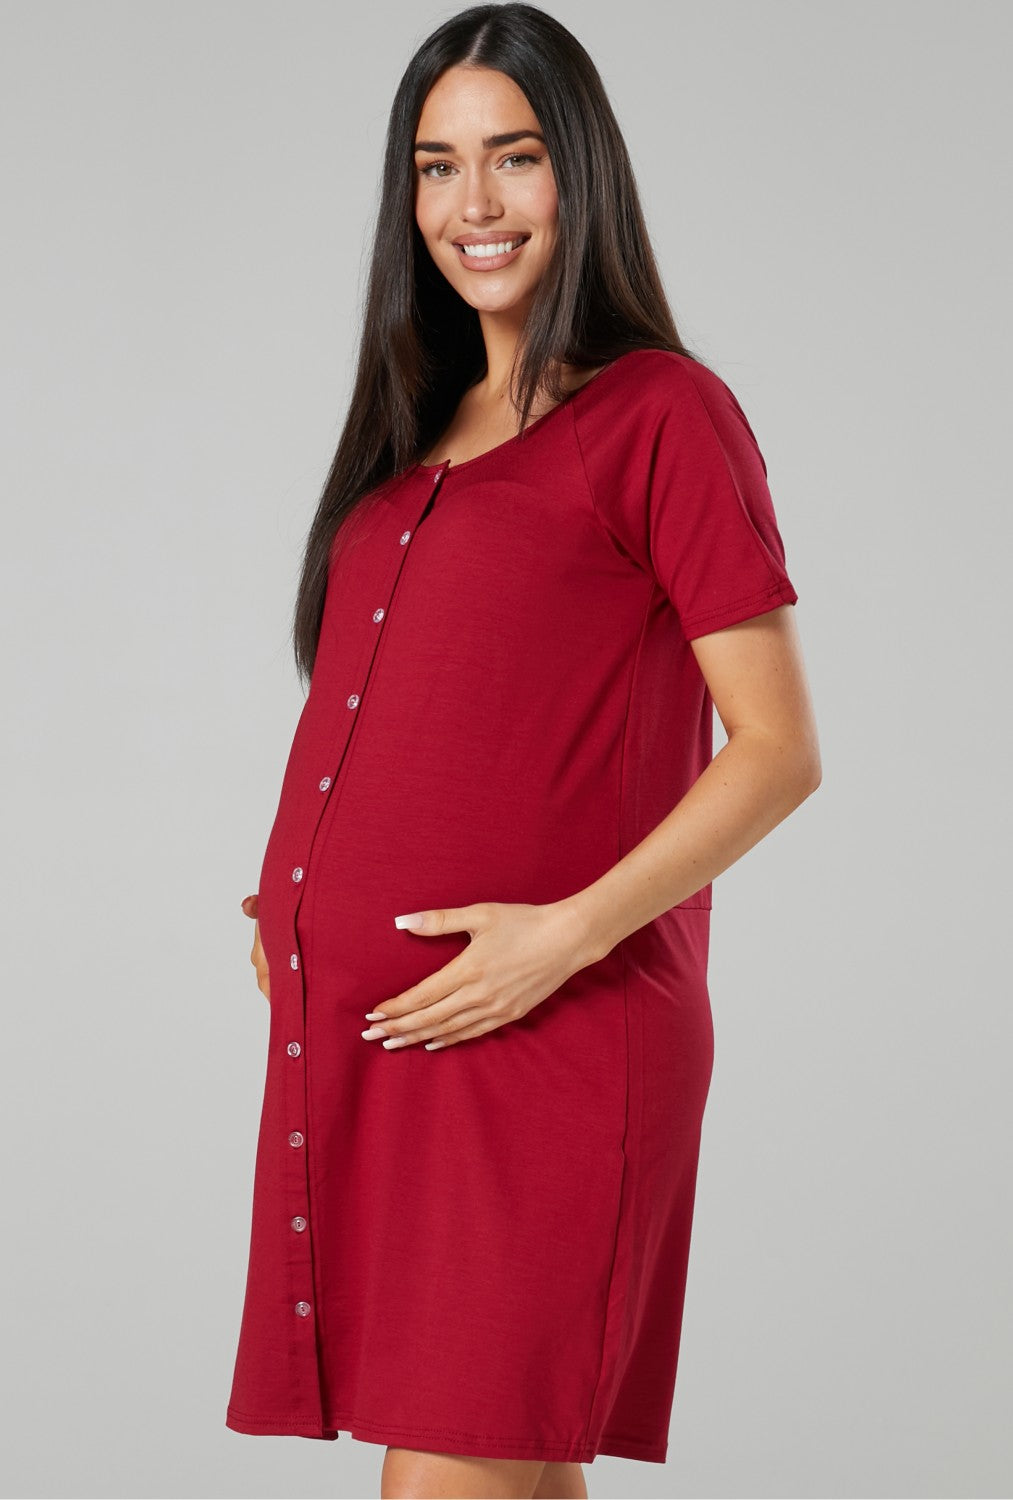 Maternity Breastfeeding Nightdress for Labour 2-pack